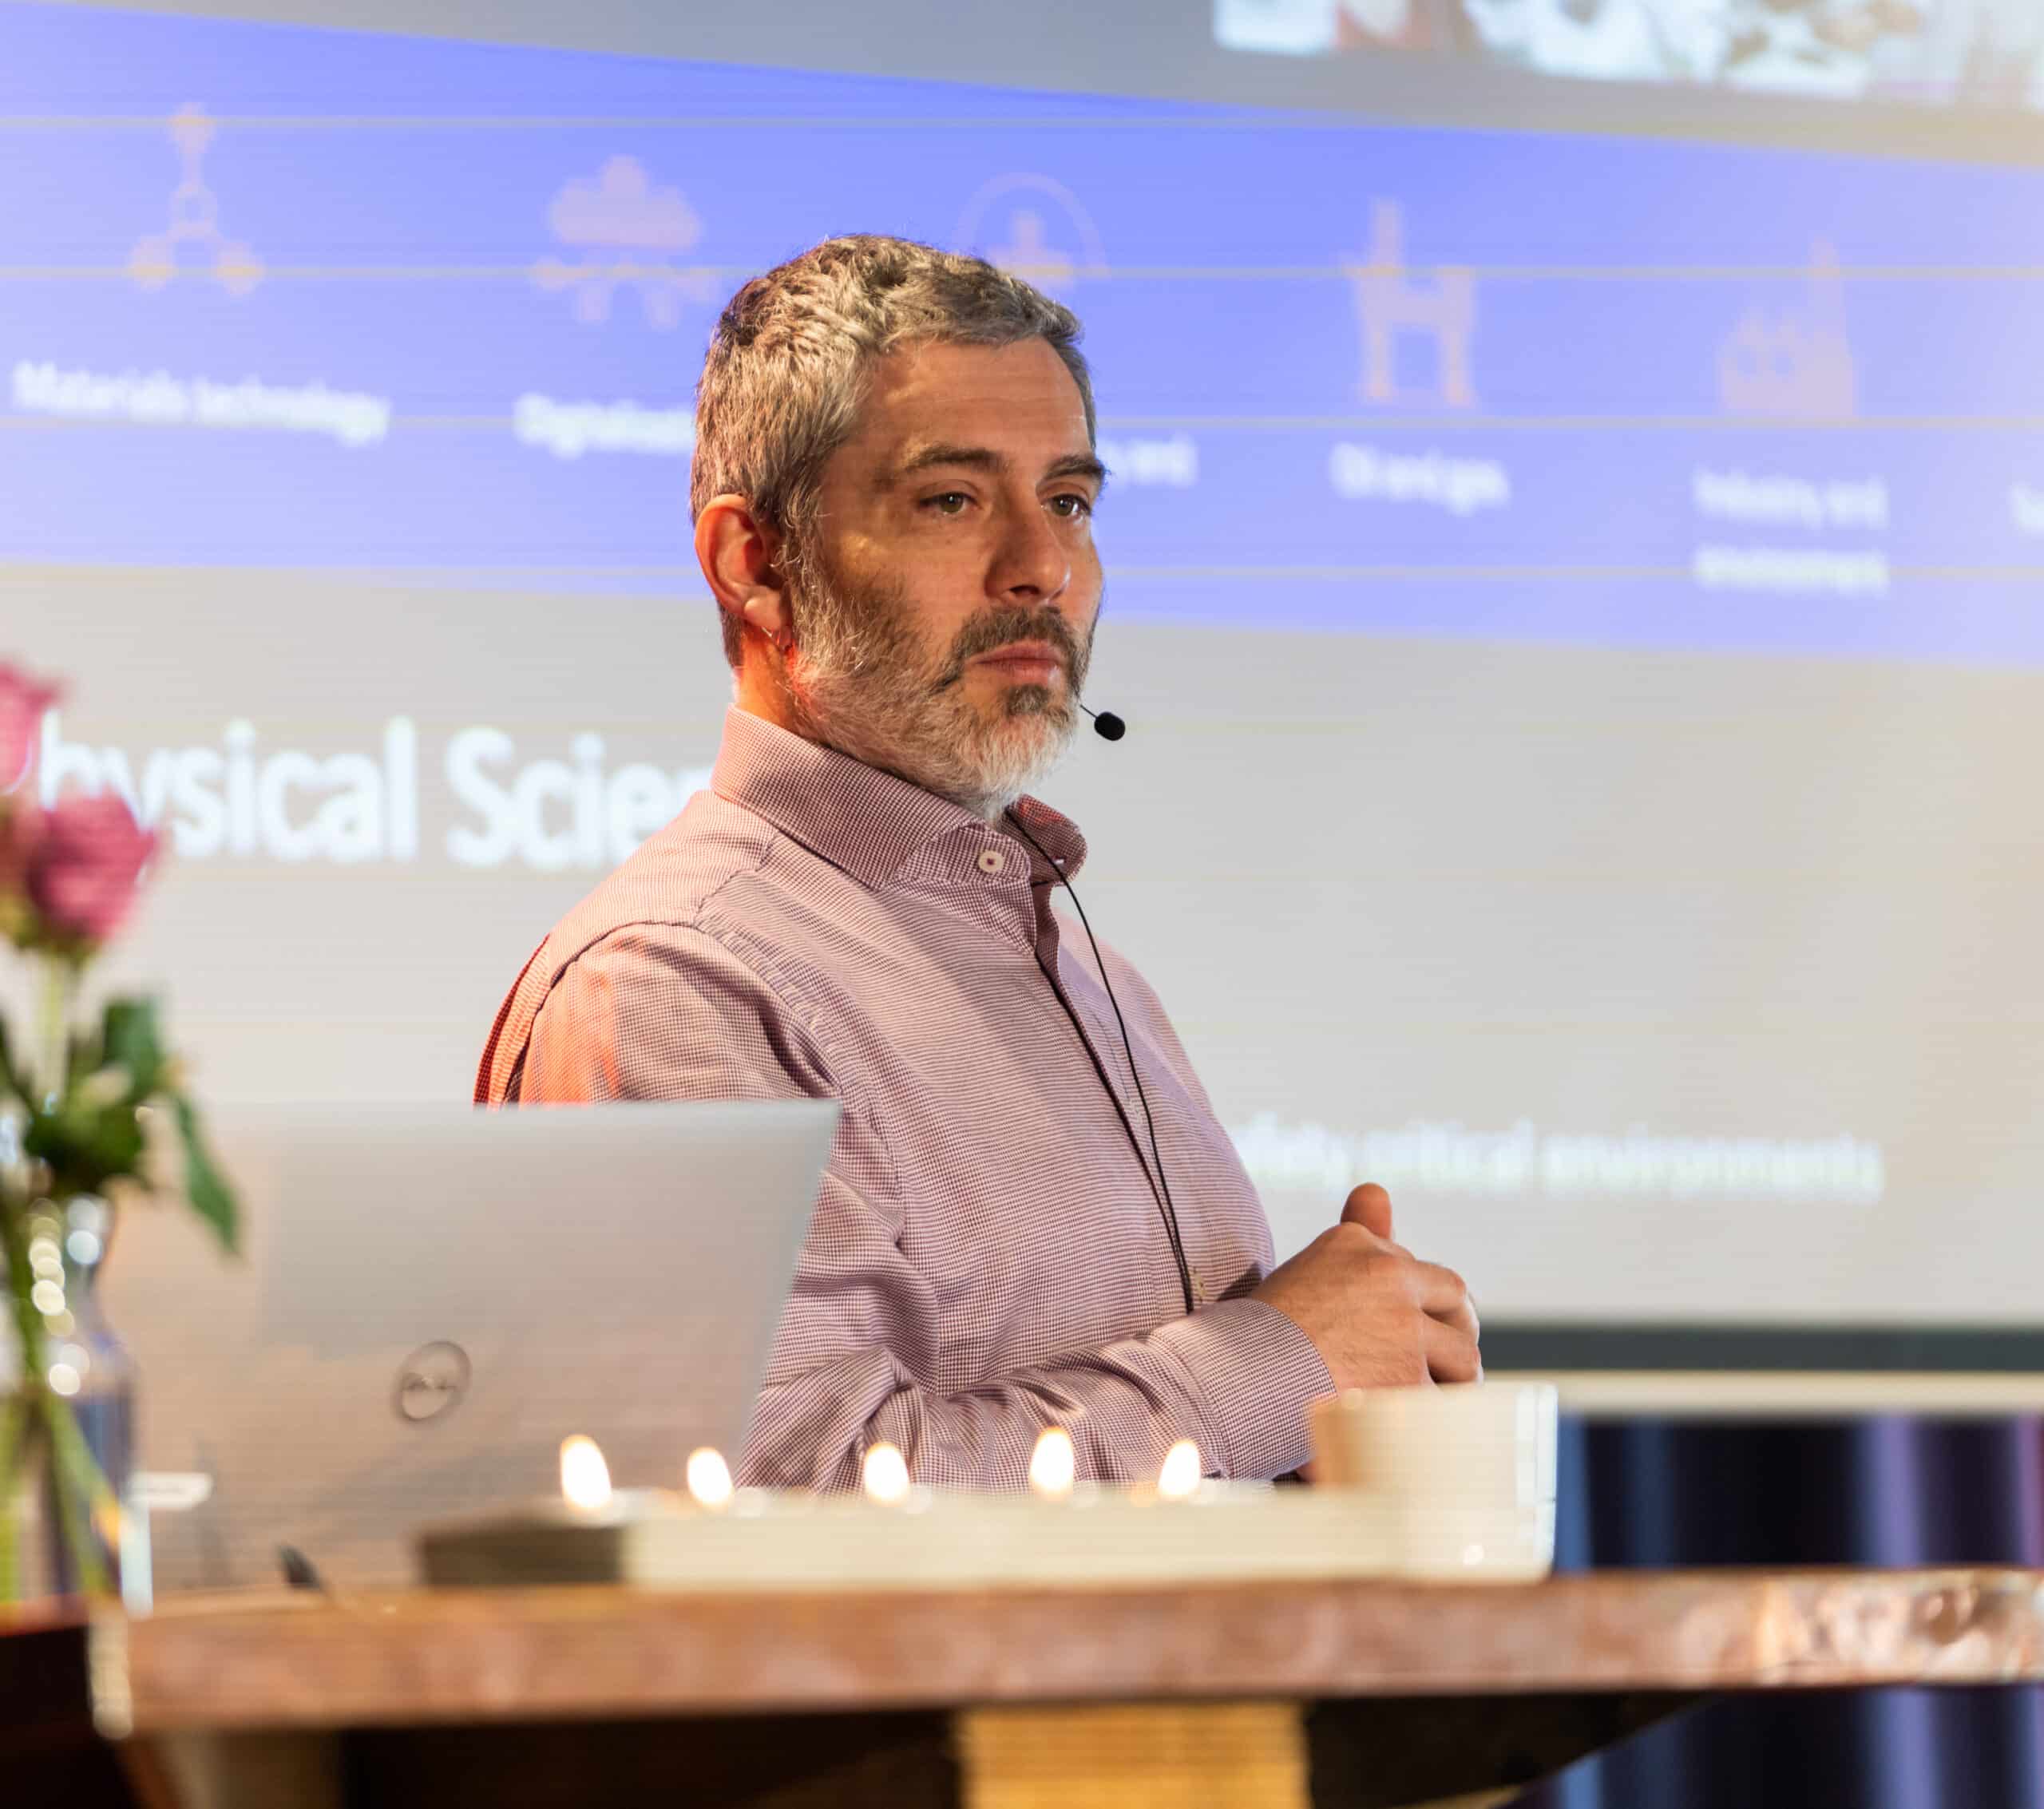 IFE's session was about Ethical Considerations when using AI, and Benefits of Applied AI in Decommissioning. They also demonstrated three examples of how AI is applied with success for industry, for science and for fun. Here István Szőke. PHOTO: Stein Johnsen, ContentVideo